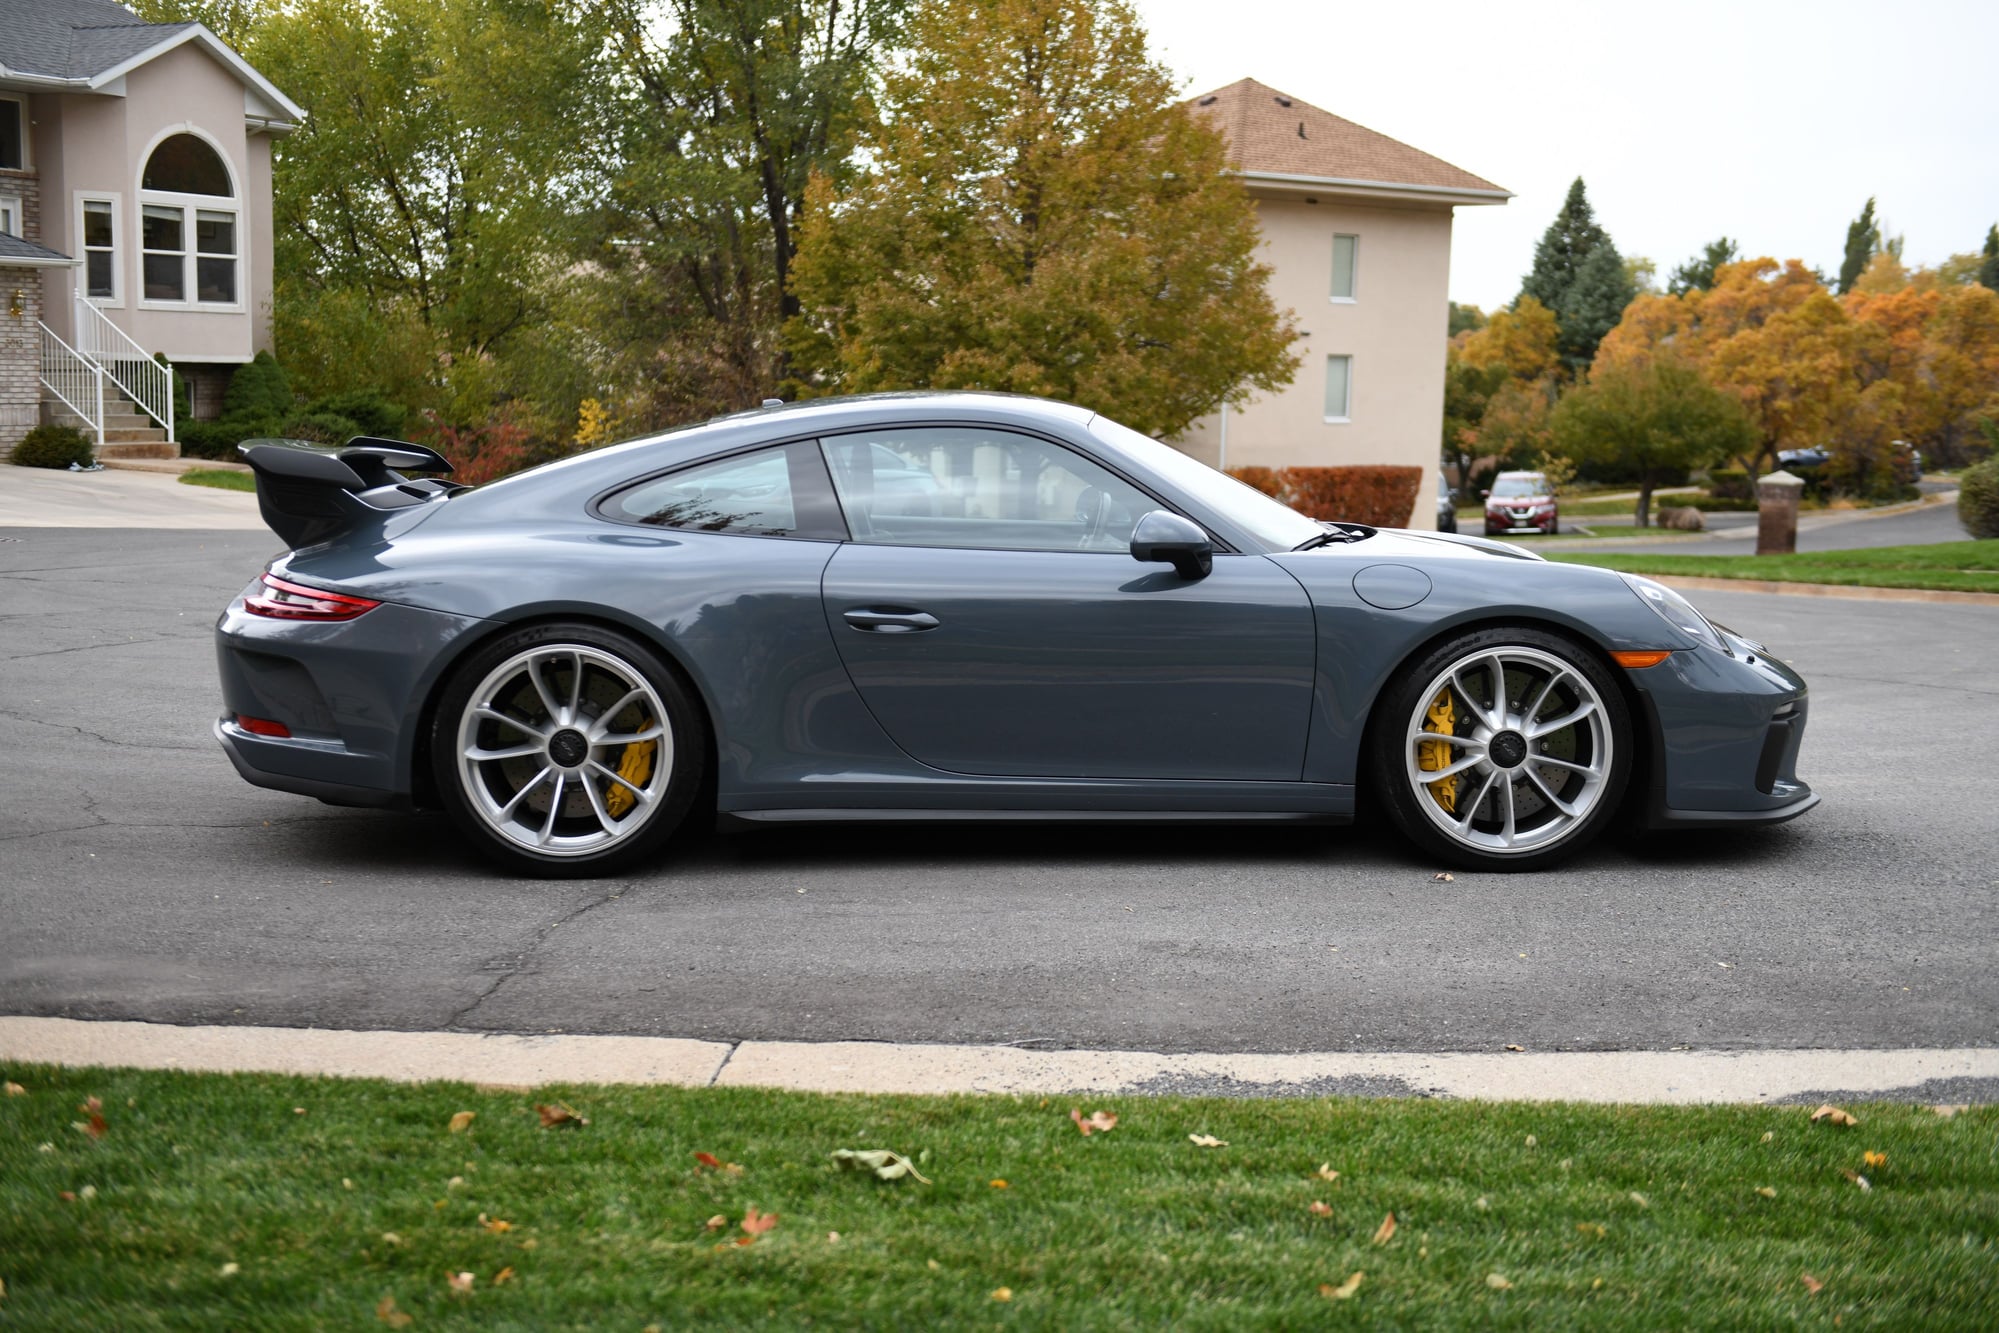 2018 Porsche GT3 - 2018 Porsche 911 GT3 6-Speed Manual Graphite Blue Metallic - Used - VIN WP0AC2A90JS175892 - 6,317 Miles - 6 cyl - 2WD - Manual - Coupe - Blue - Centerville, UT 84014, United States